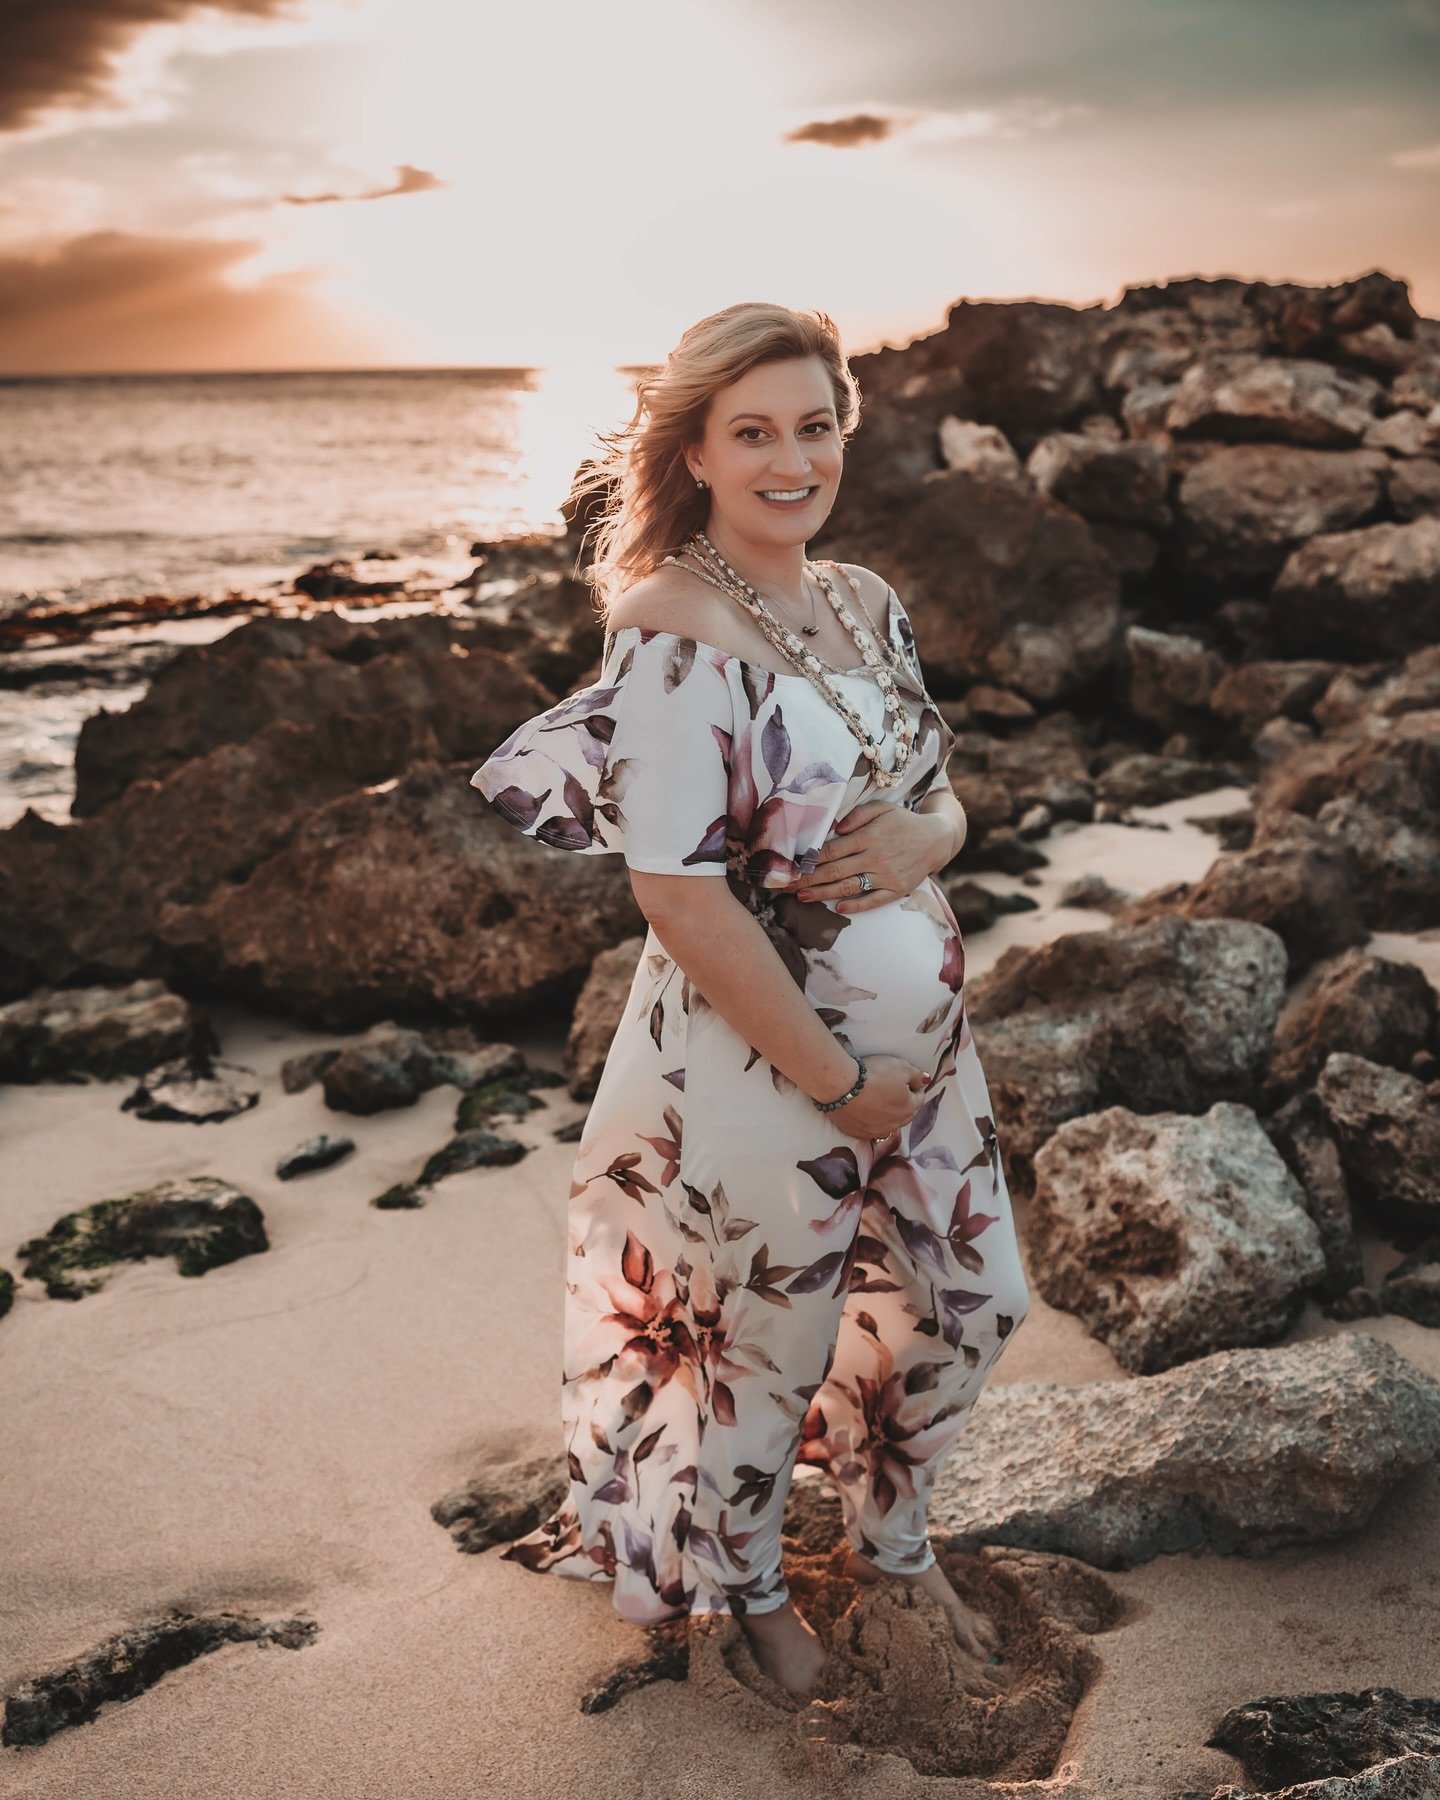 ✨ Magic in the Making ✨

I had the absolute honor of capturing this beautiful moment for an expecting mother during her vacation in Hawaii. Before sharing her joyous news with family, she chose this breathtaking backdrop to create the perfect announc